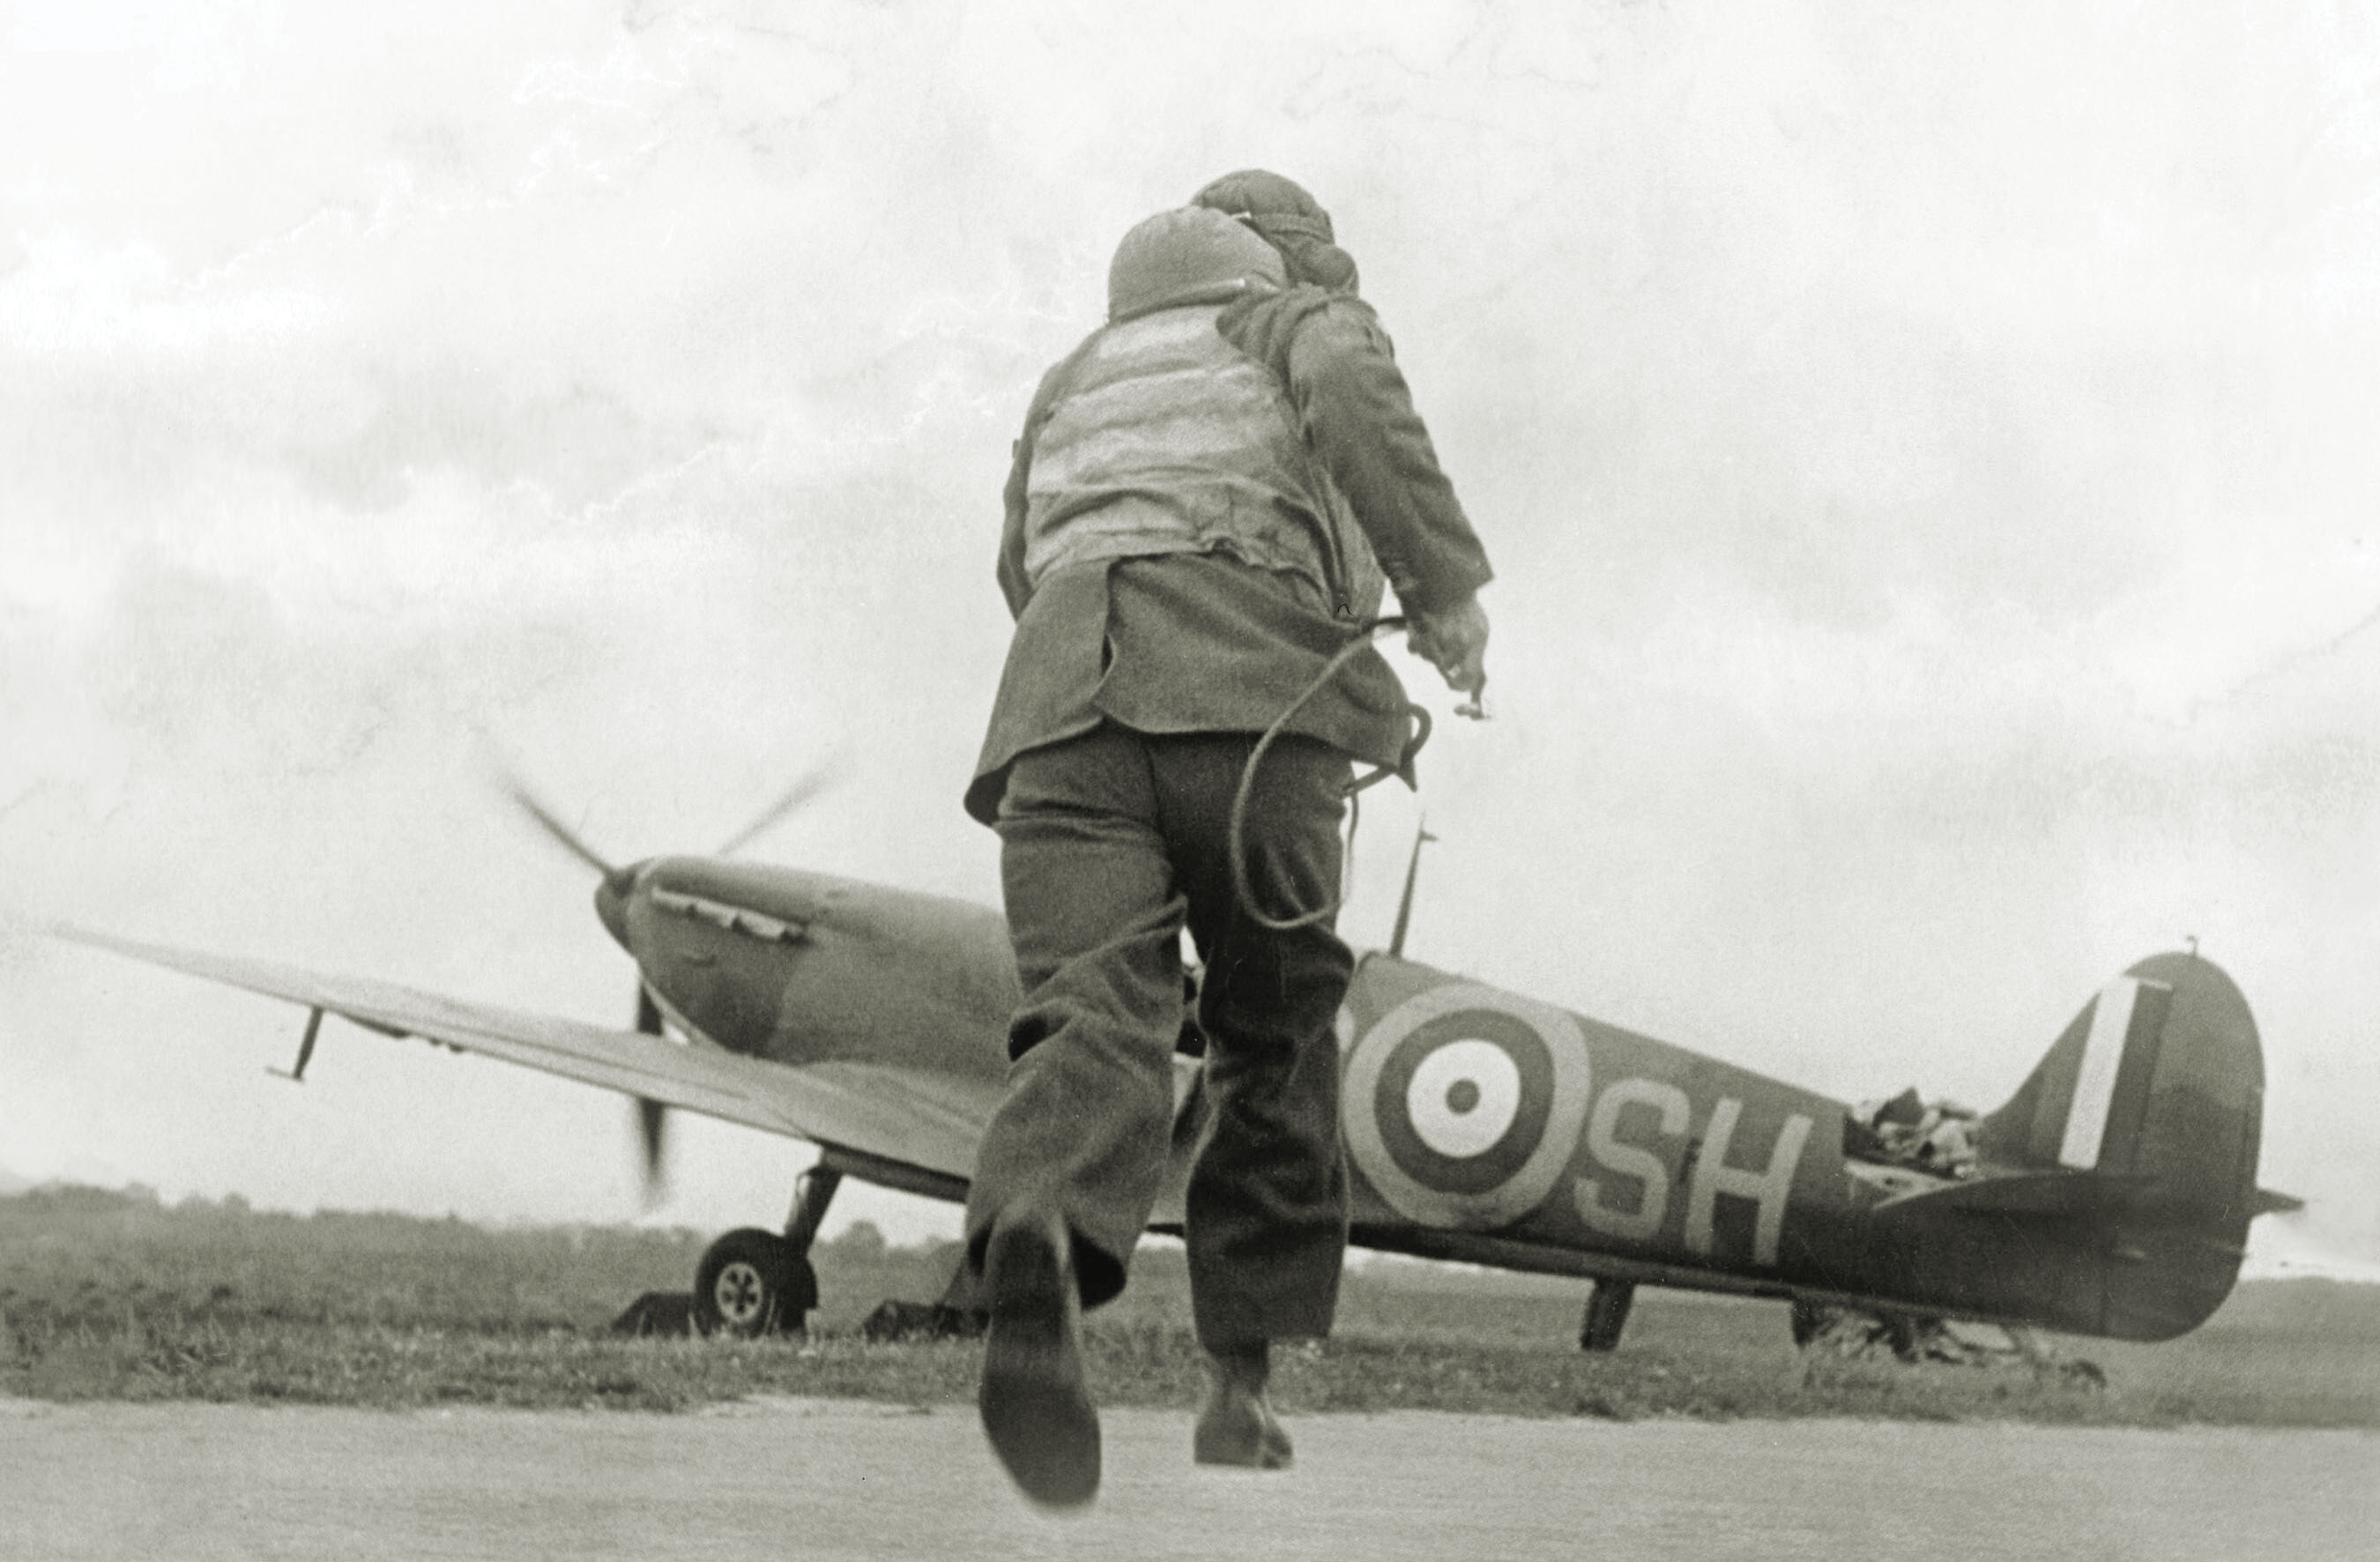 A Spitfire pilot dashes for his aircraft. / Imperial War Museums